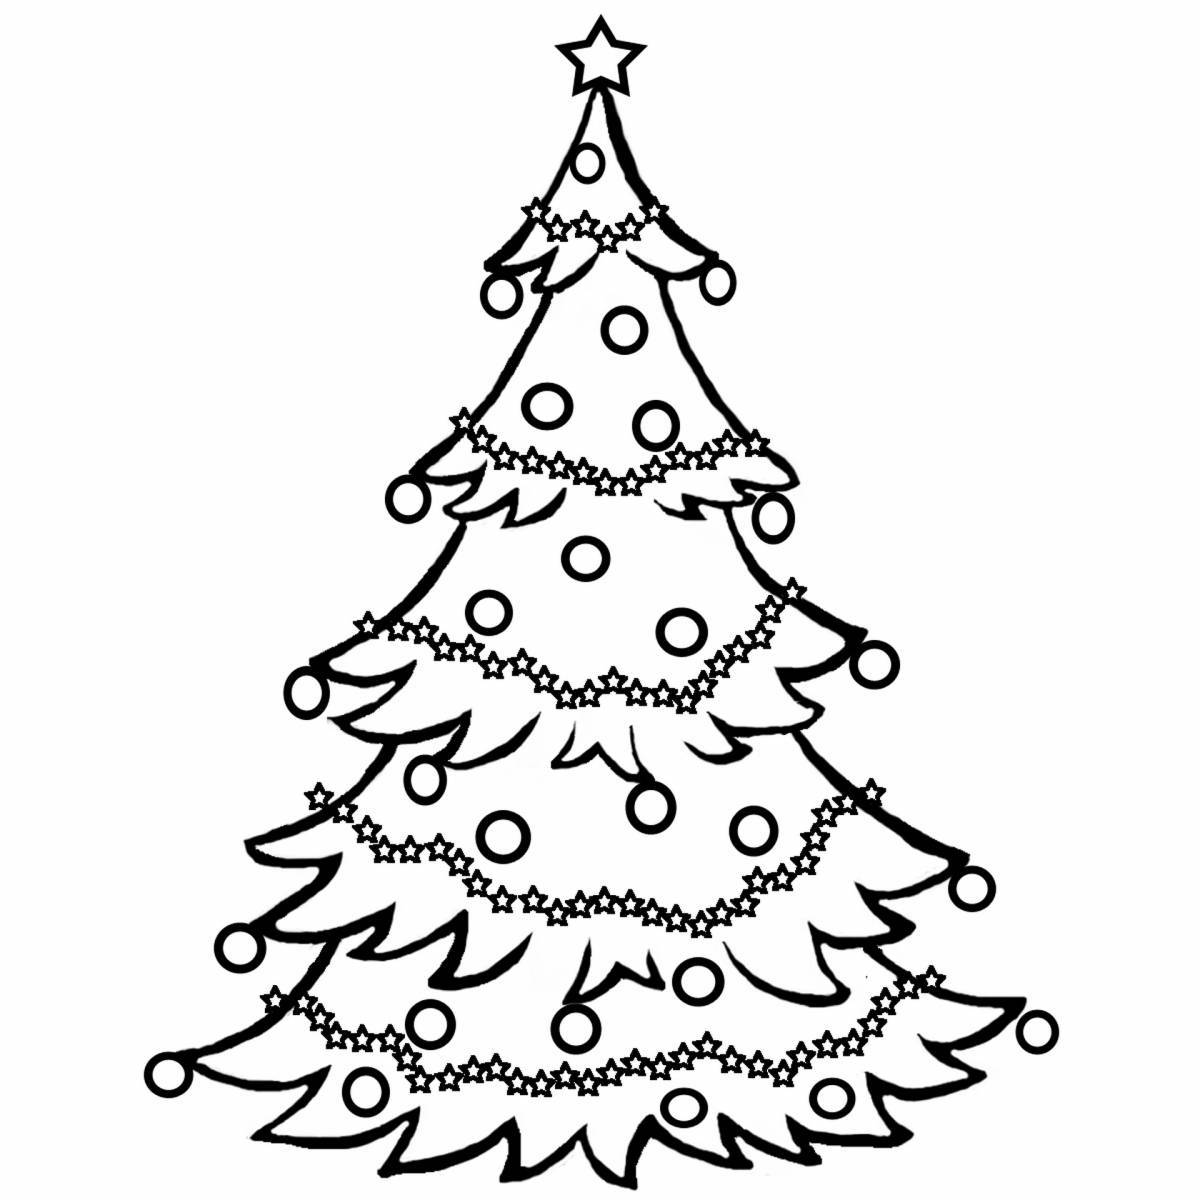 Gorgeous Christmas tree coloring book for 3-4 year olds